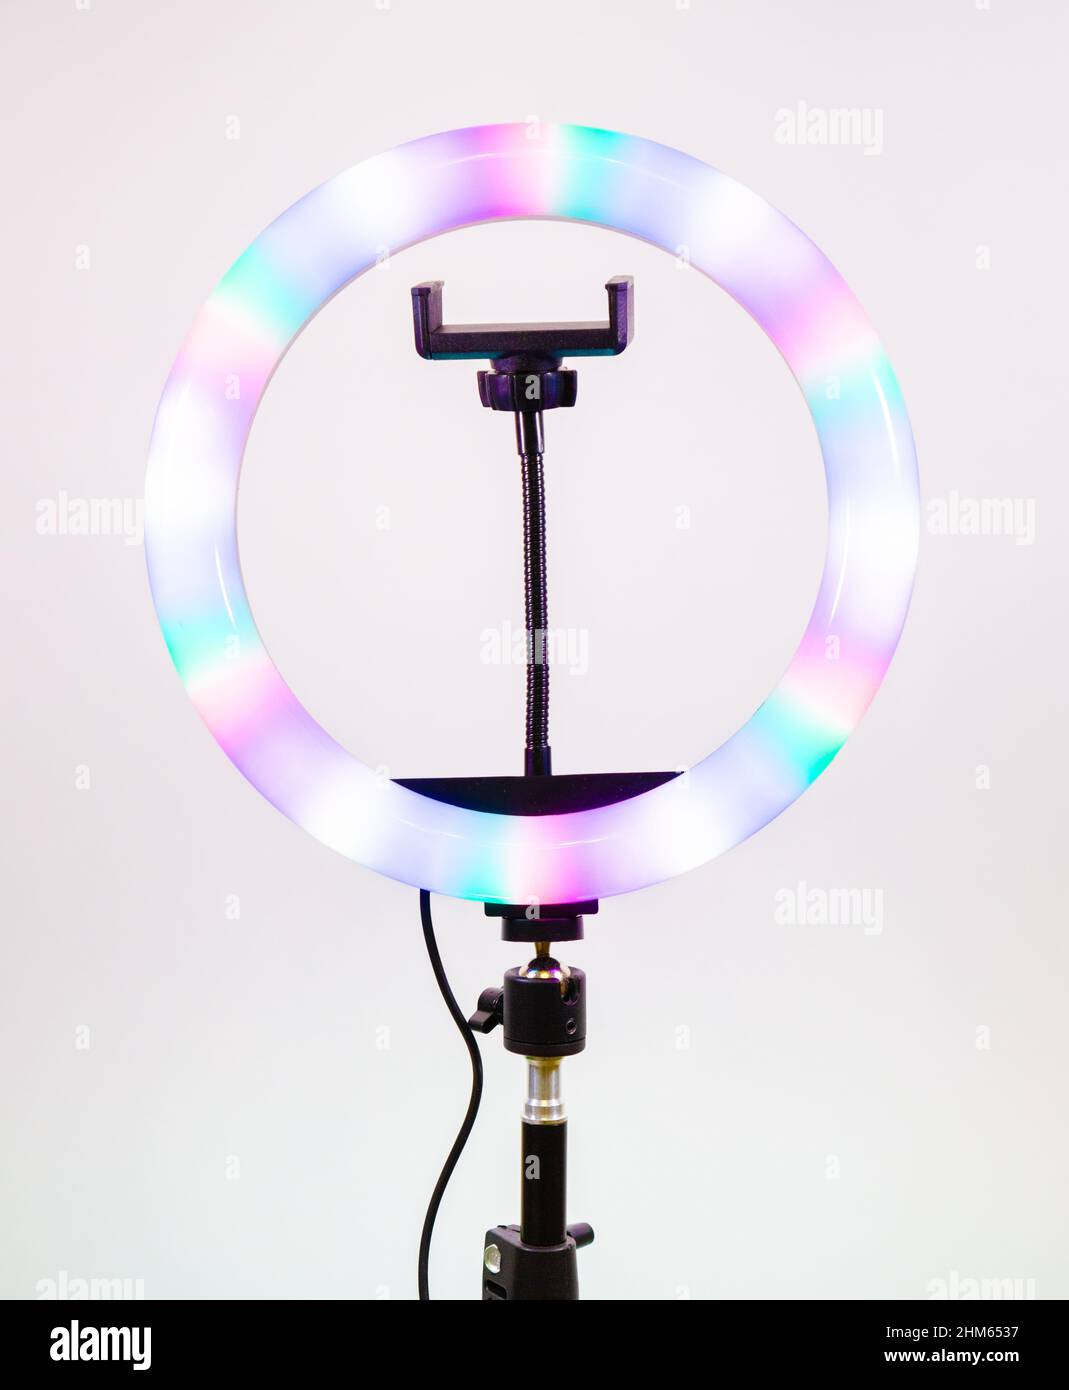 Ring lamp shines in different colors. Magic of light. Stock Photo